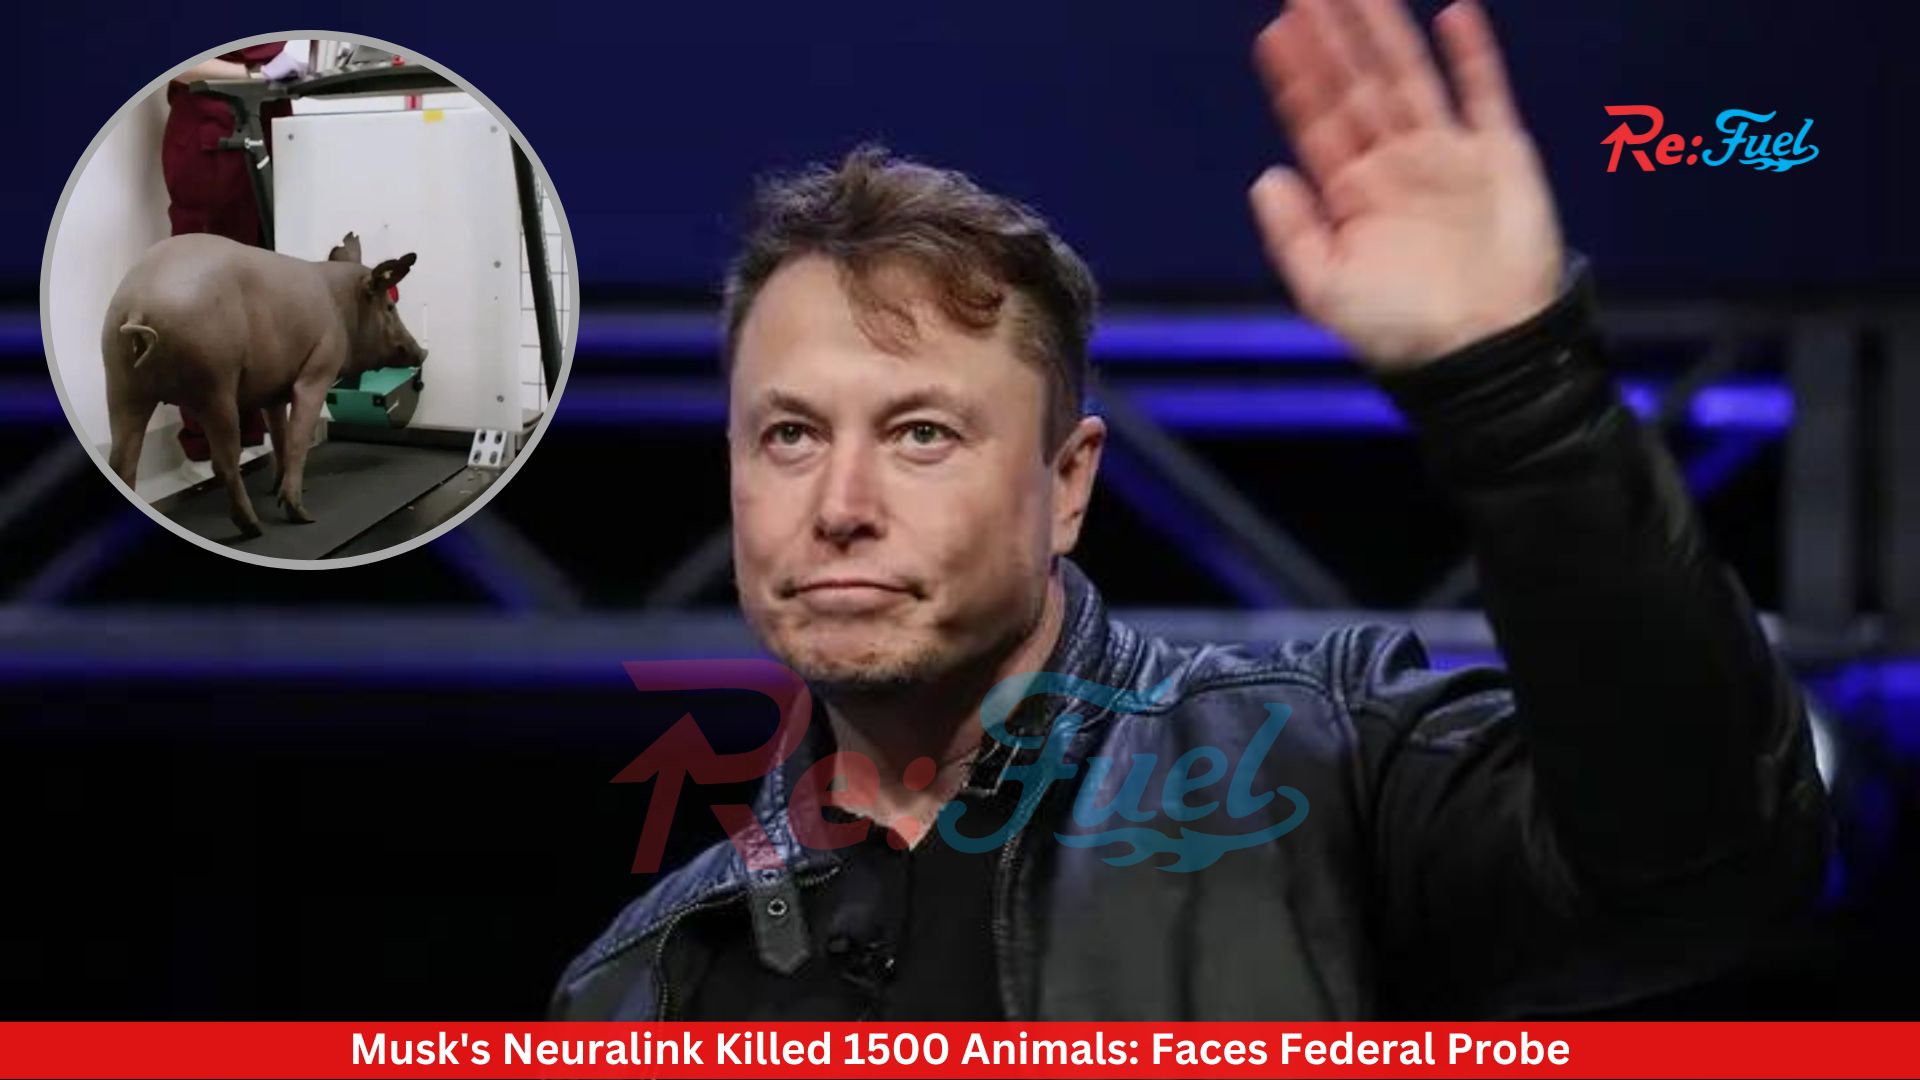 Musk's Neuralink Killed 1500 Animals: Faces Federal Probe